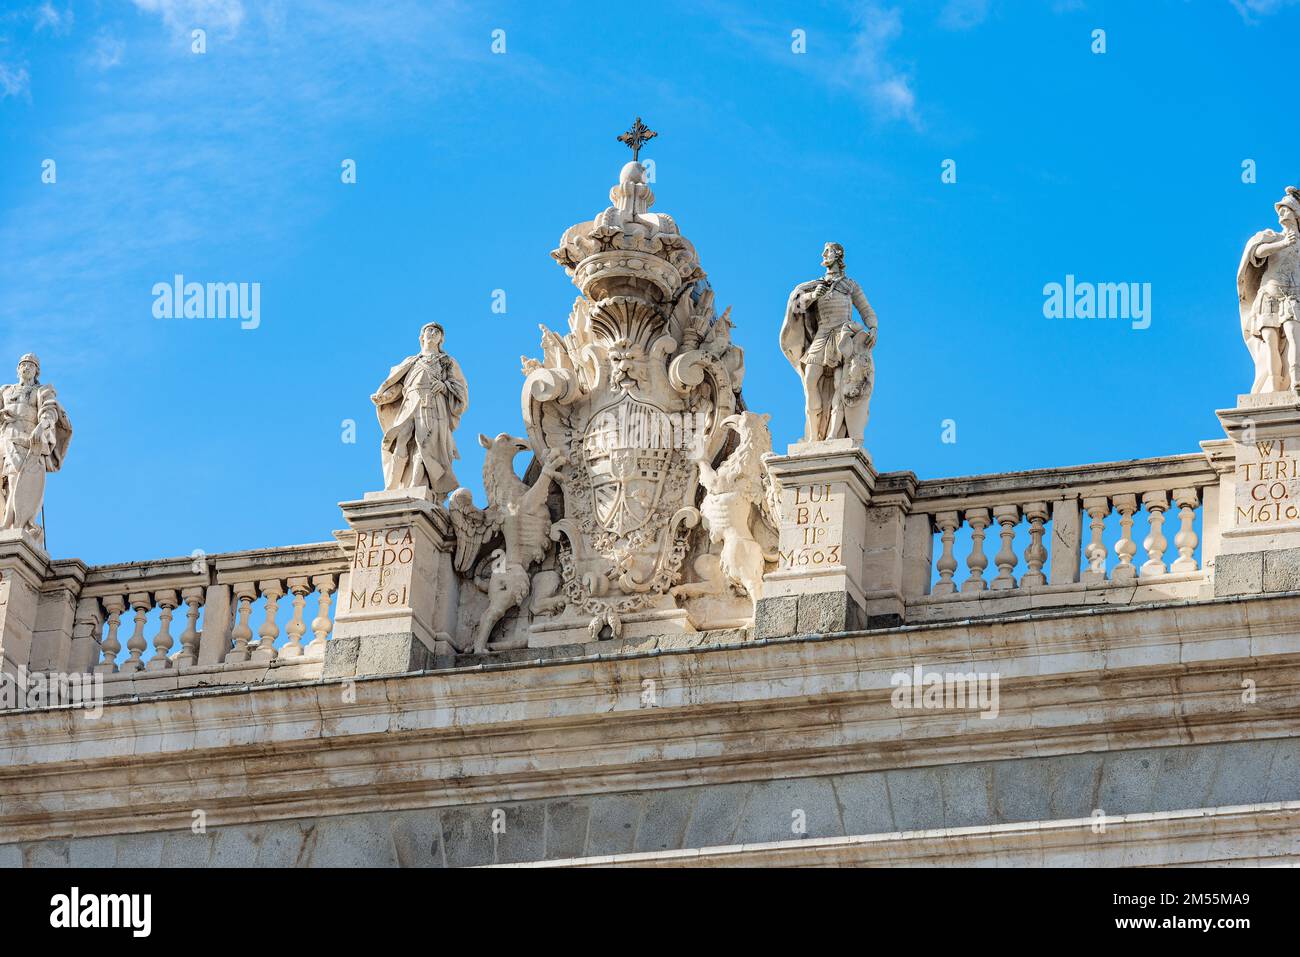 Close-up of Madrid Royal Palace in Baroque style, in the past used as the residence of the King of Spain, Plaza de la Armeria, Spain, Europe. Stock Photo